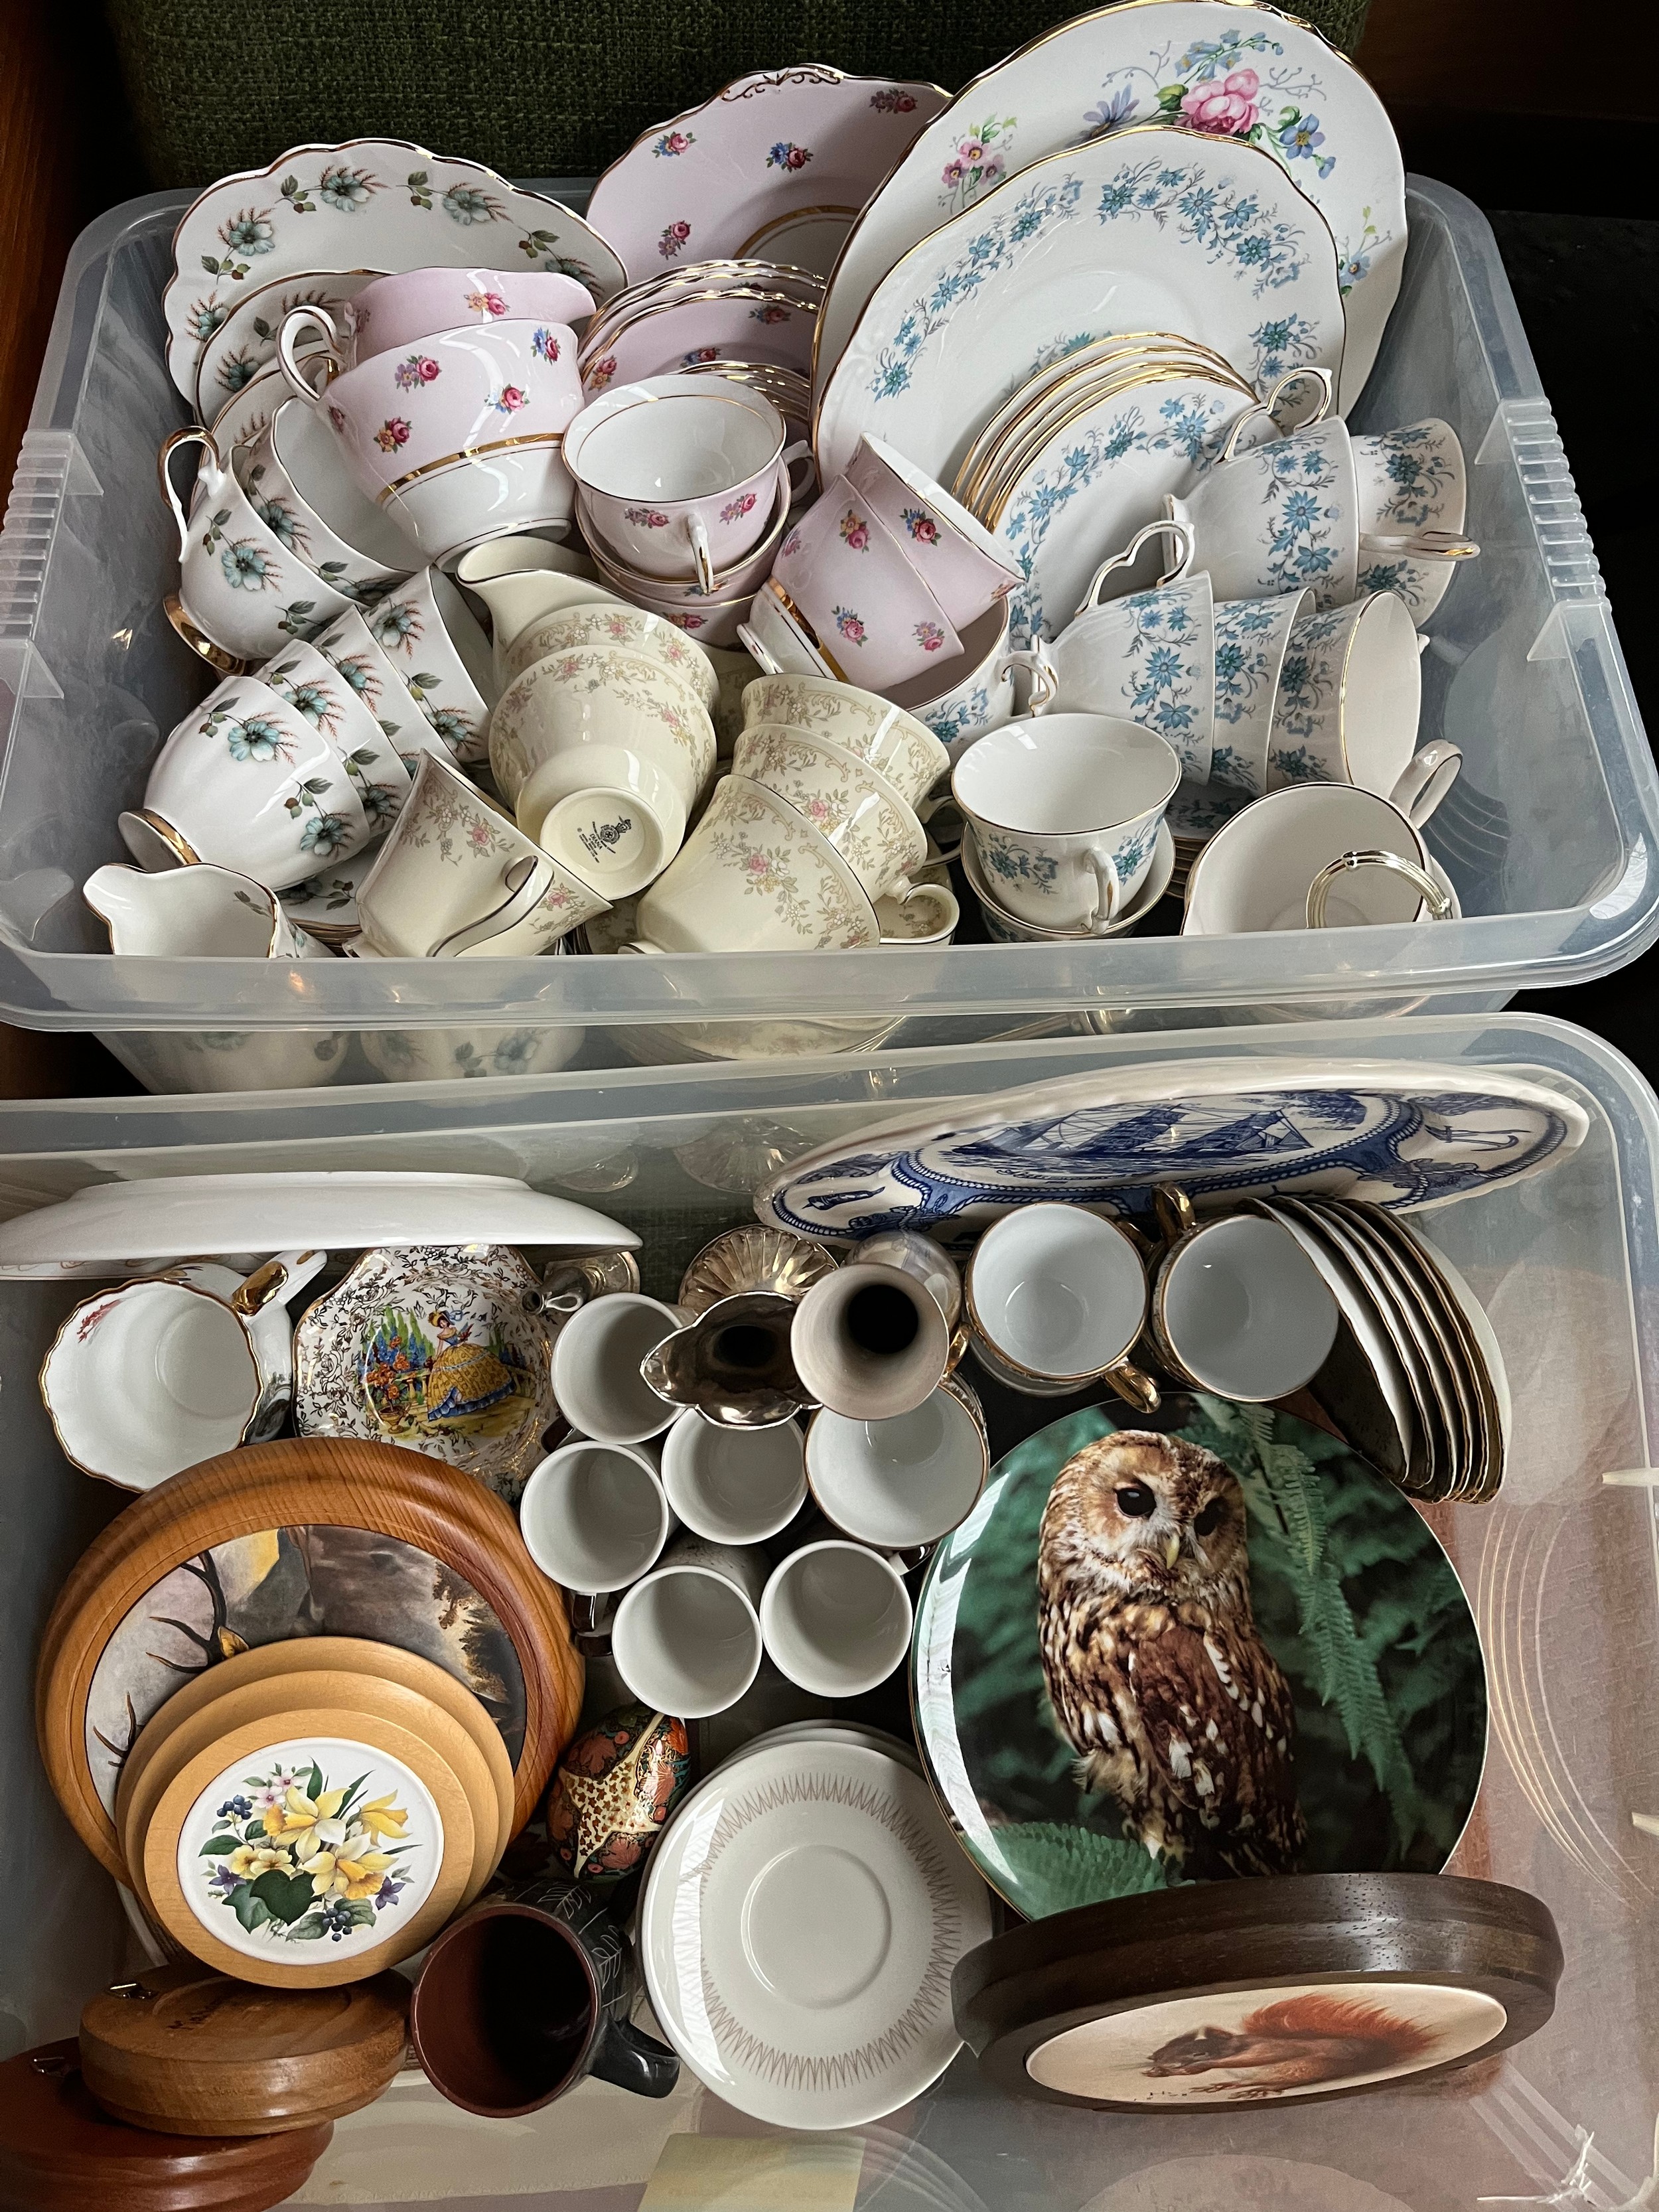 Two boxes of collectable porcelain to include Royal Doulton tea set, Collectors plates and various